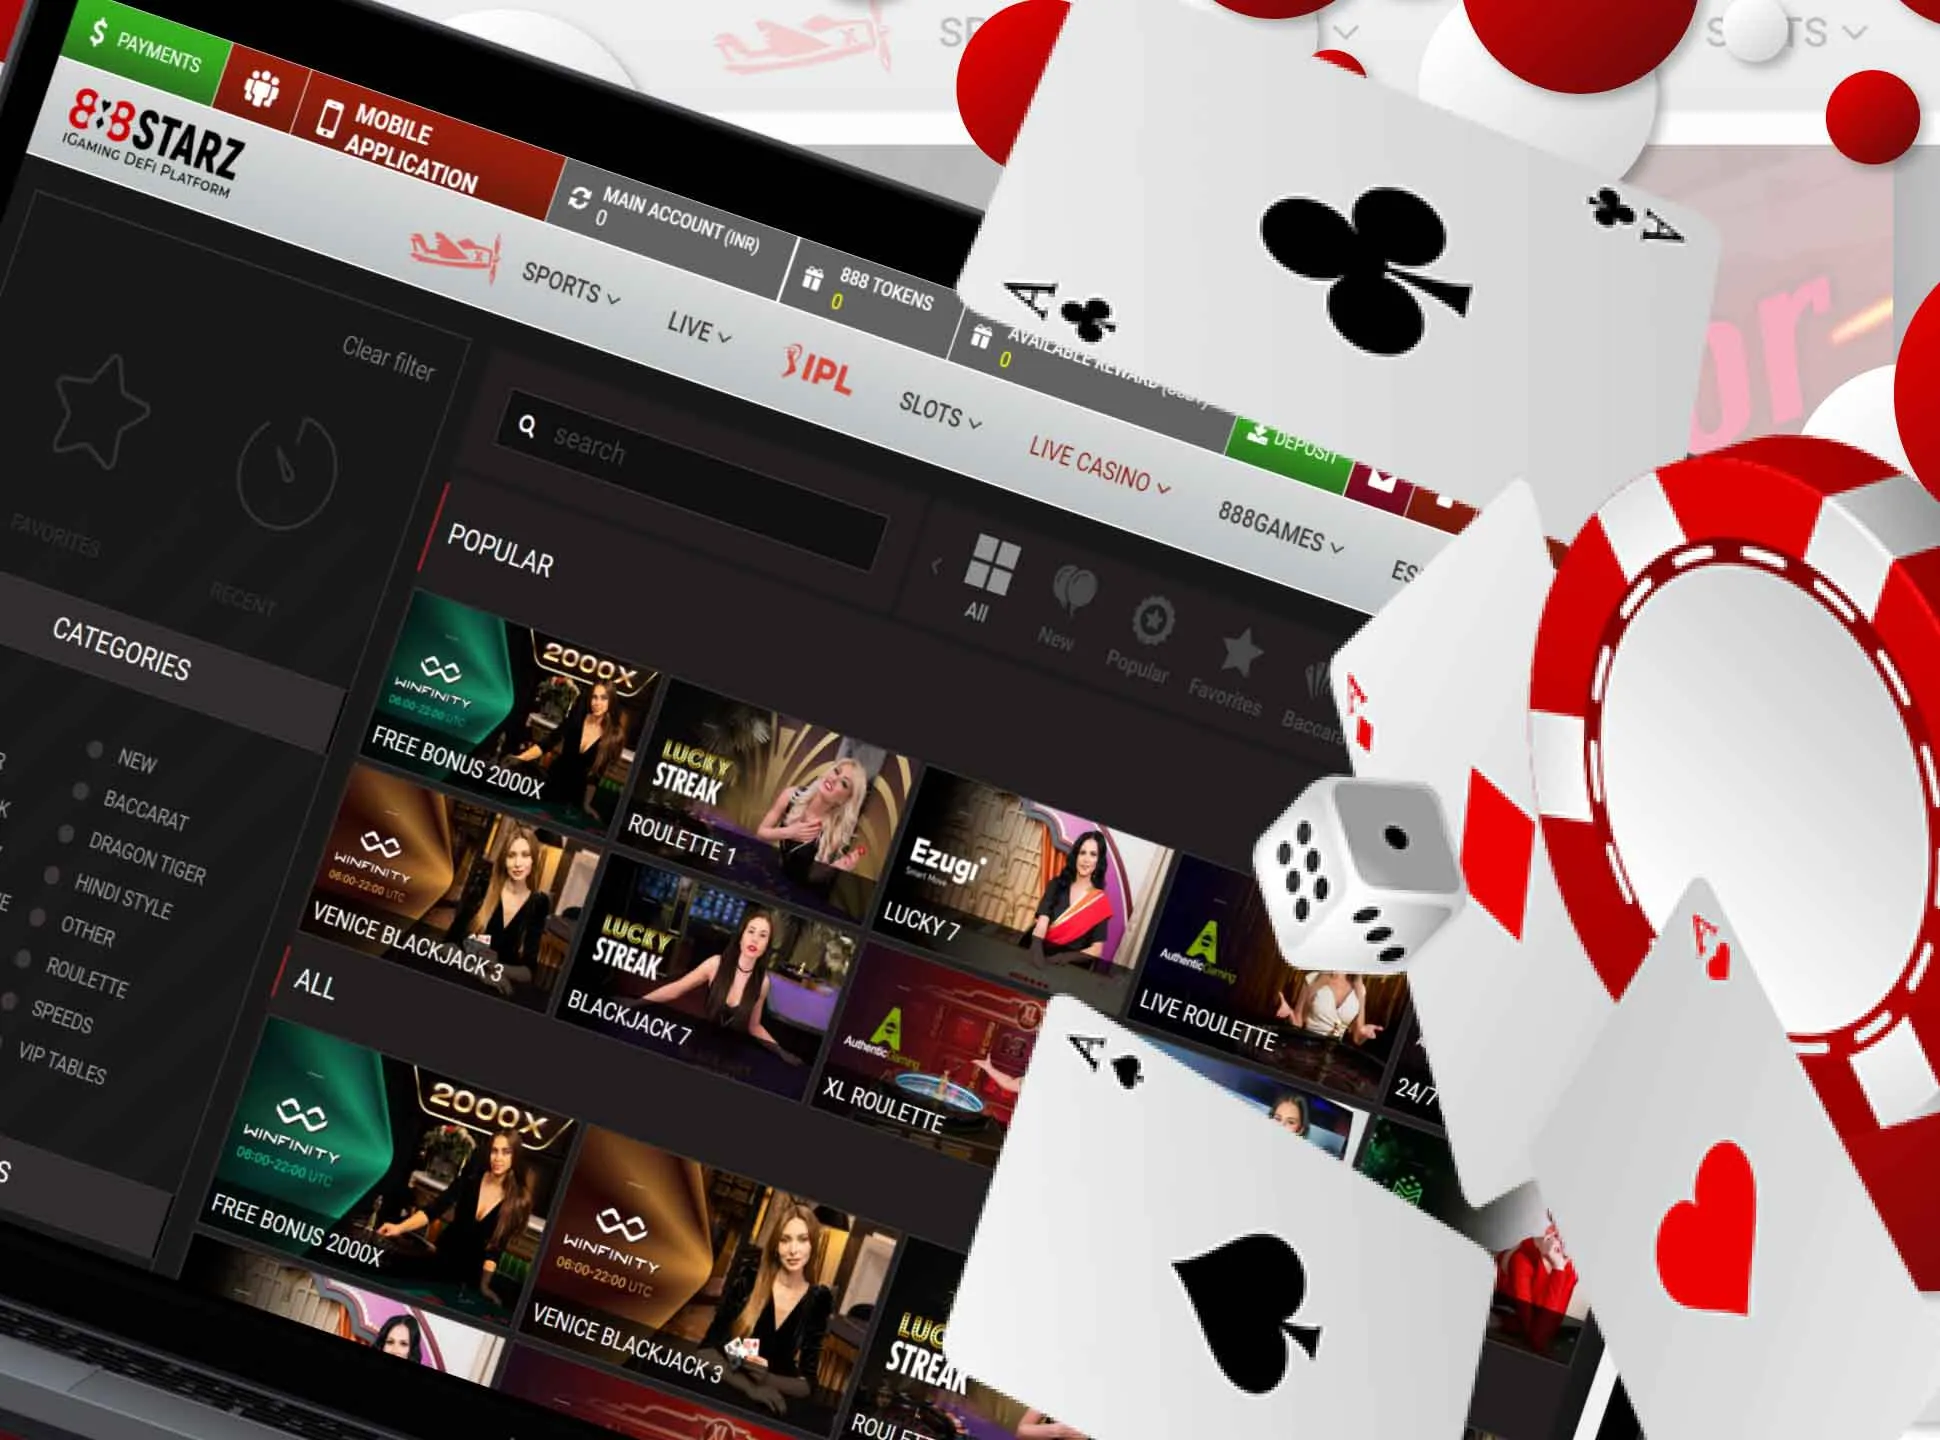 88starz also offers online casino entartainment in its apps.